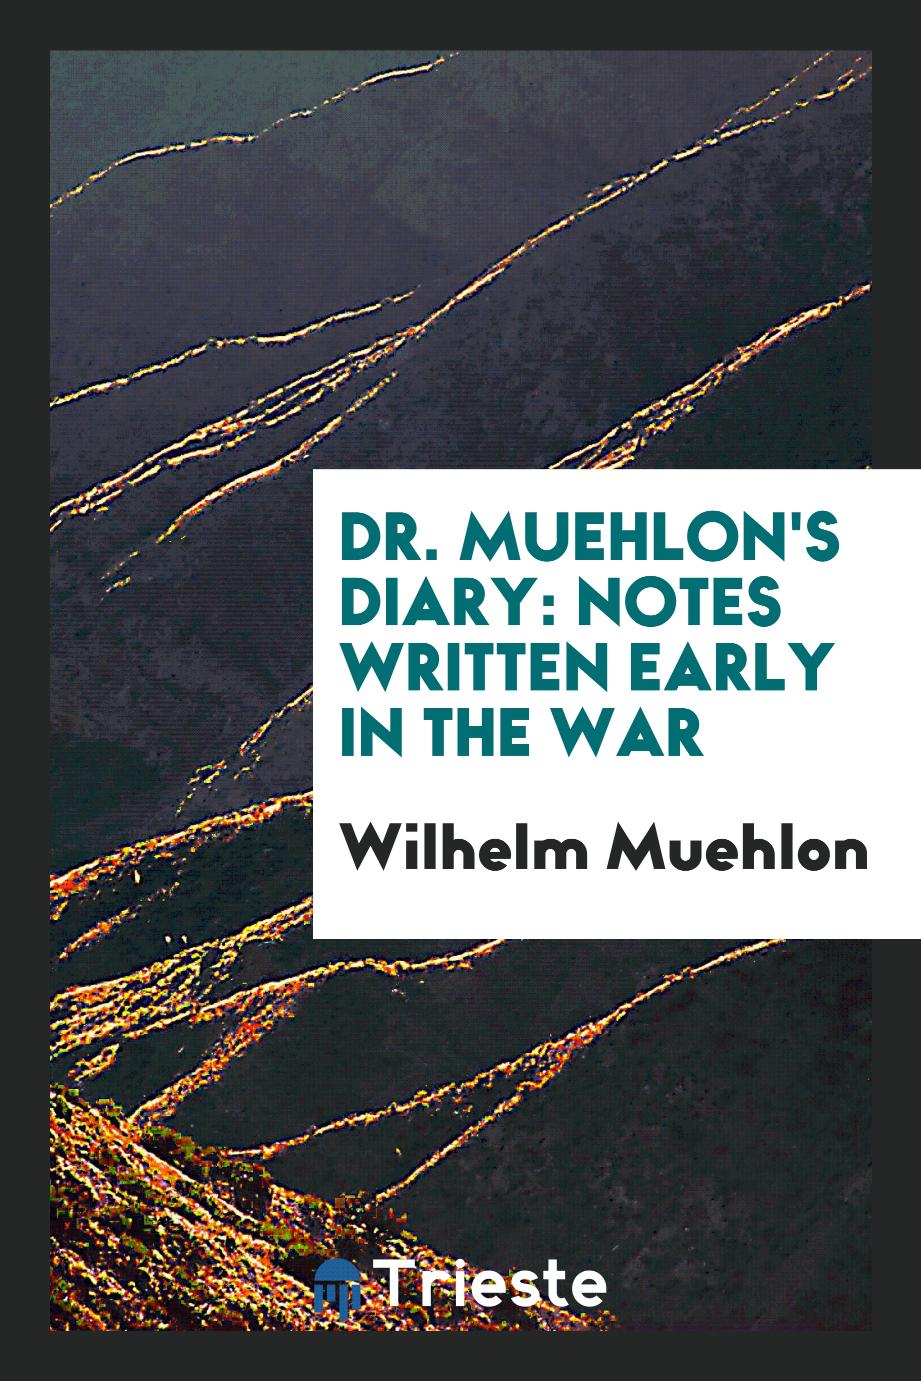 Dr. Muehlon's diary: Notes Written Early in the War